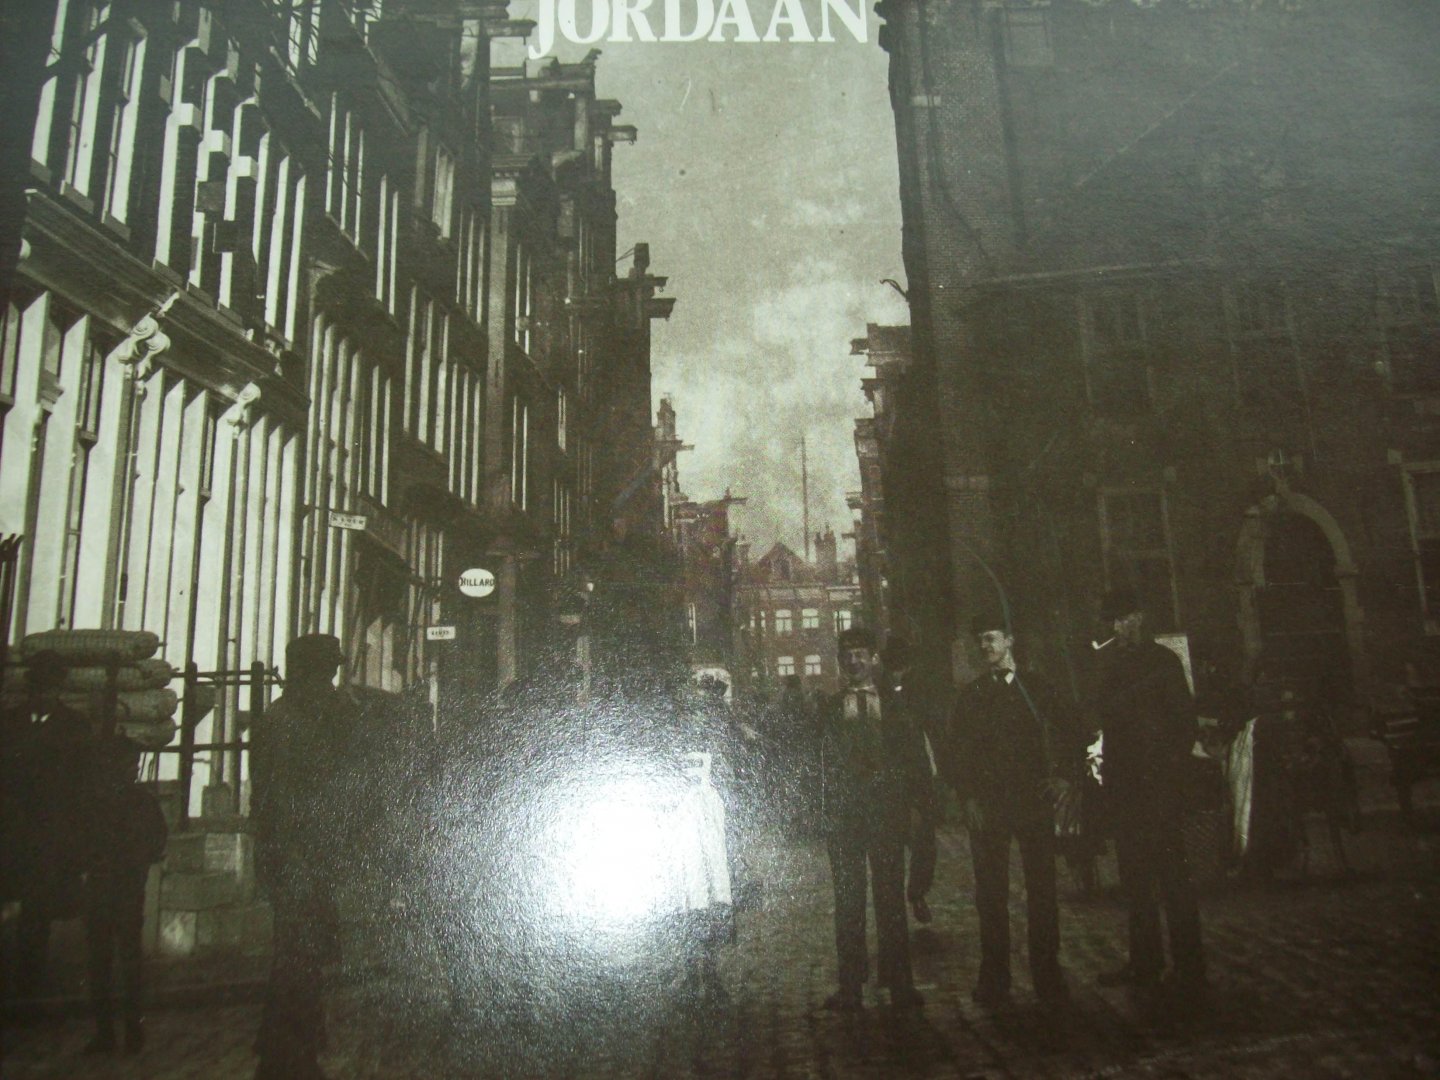 J. Balk - "Jordaan" A future for the past